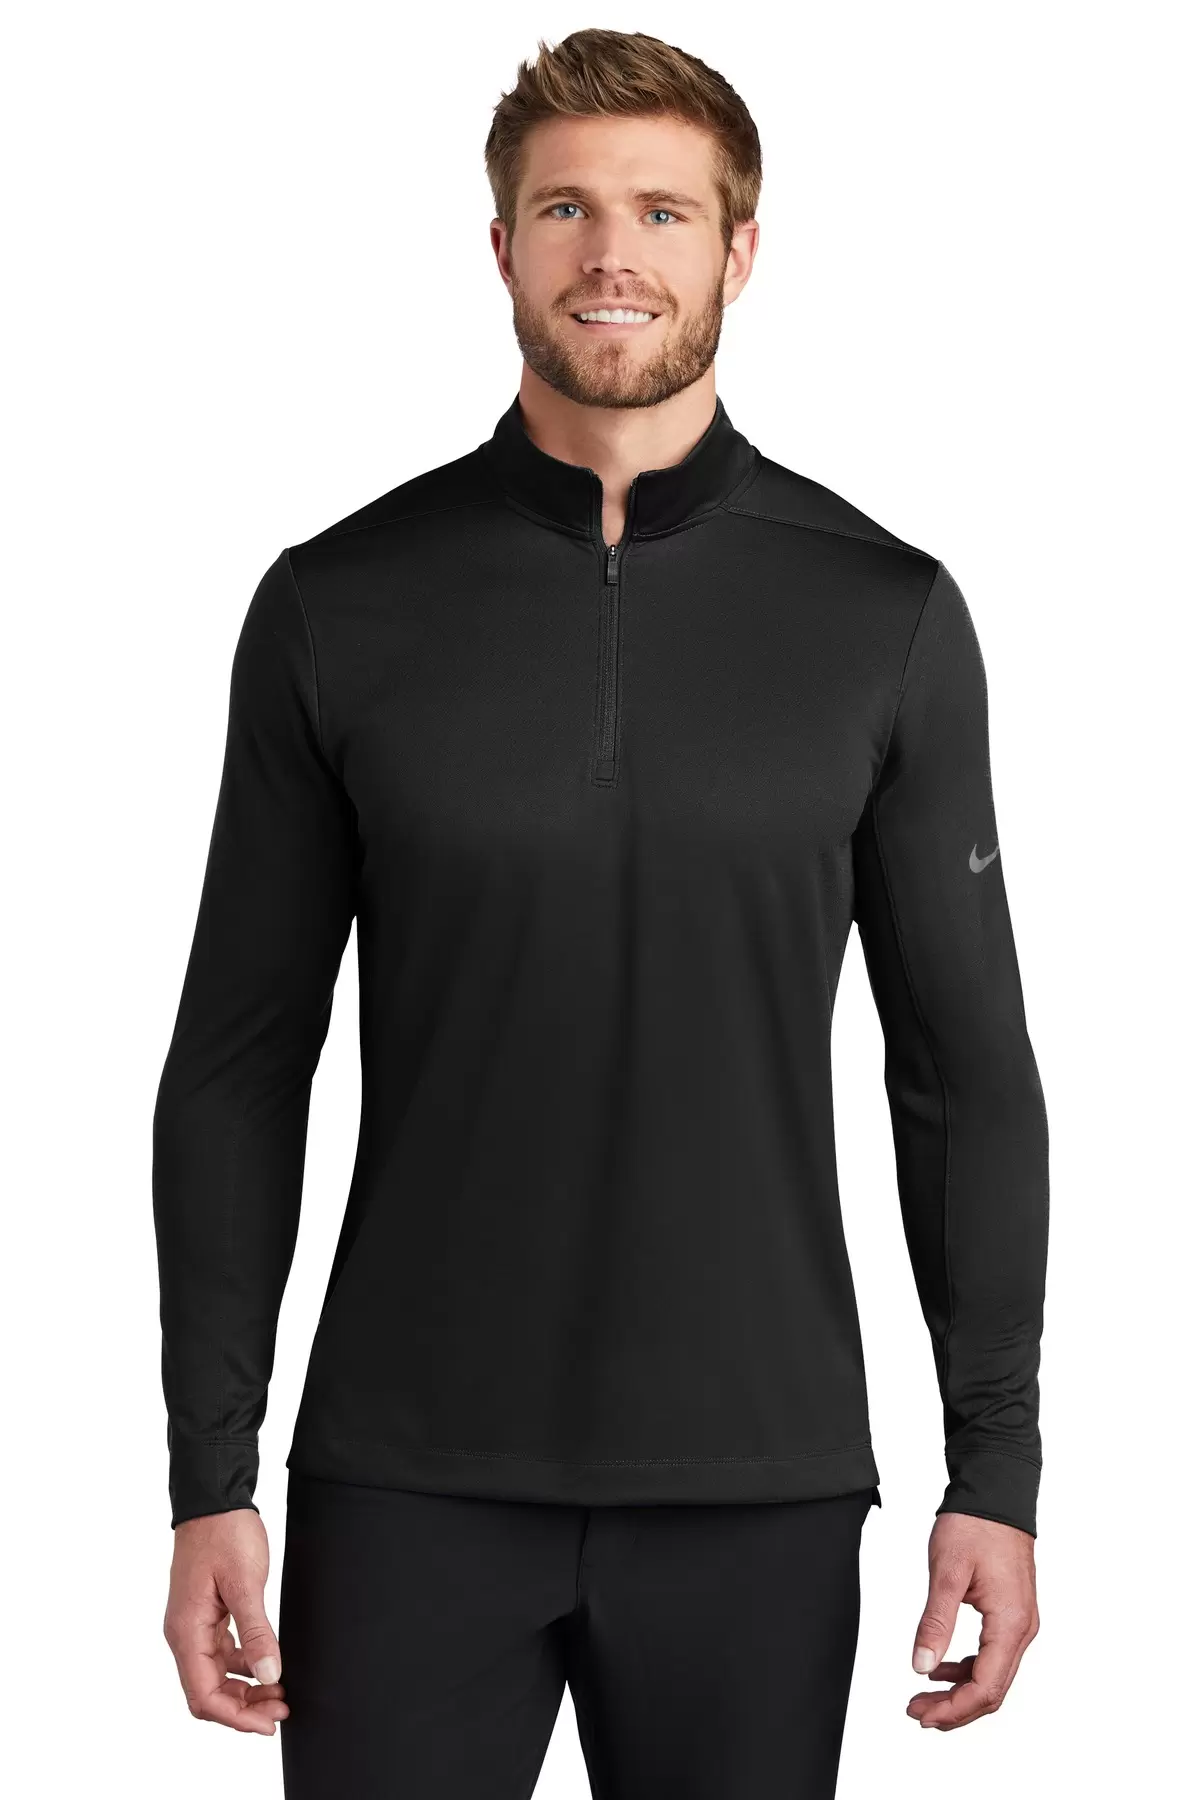 Nike BV6044 Dry 1/2-Zip Cover-Up - blankstyle.com